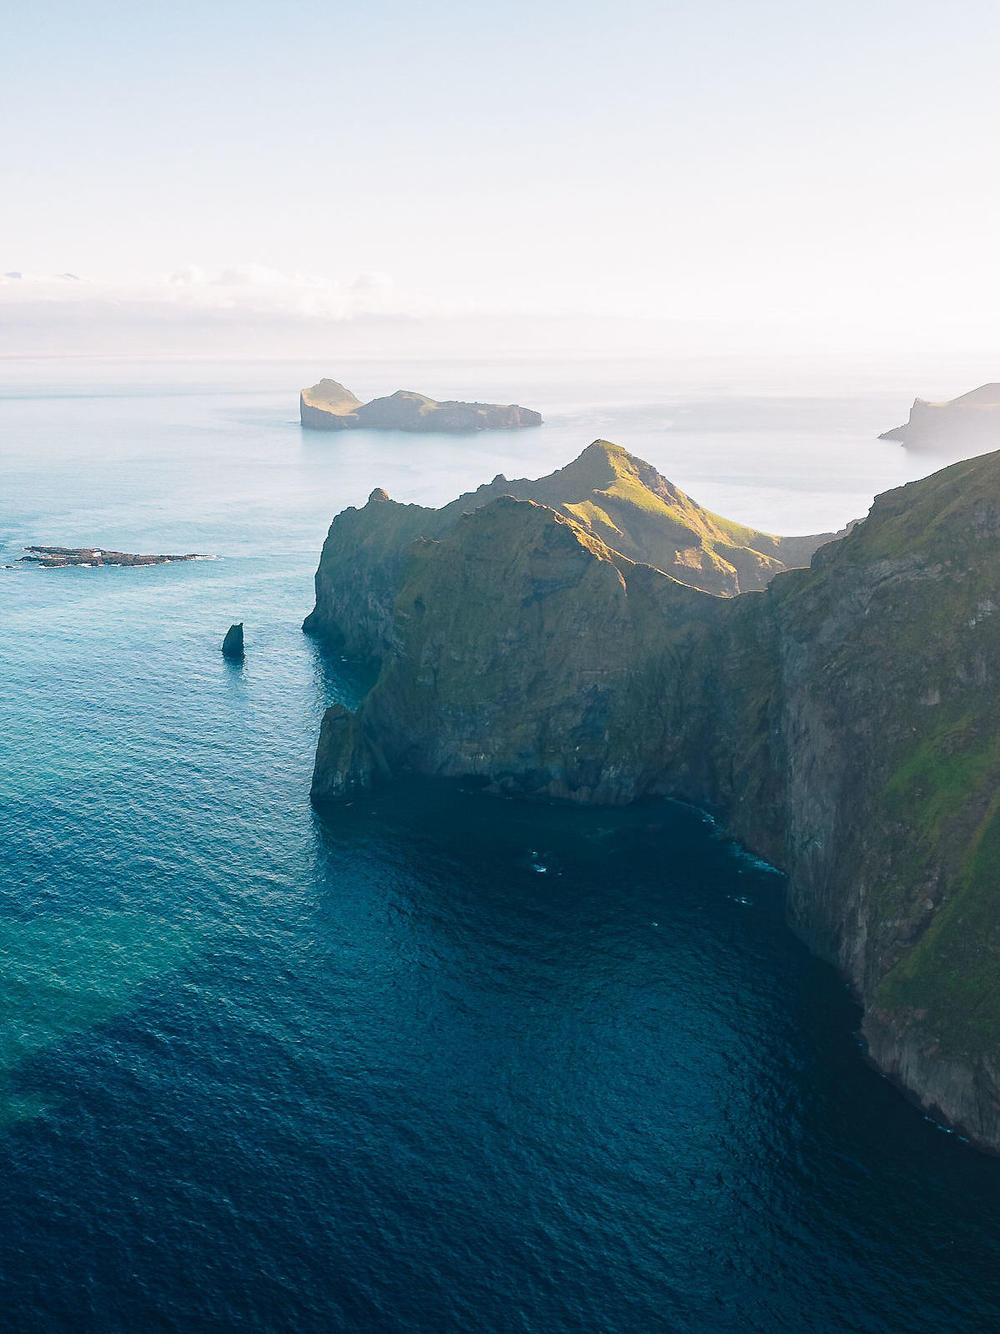 Vestmannaeyjar is an archipelago of volcanic islands and rock stacks off the southern coast of Iceland.